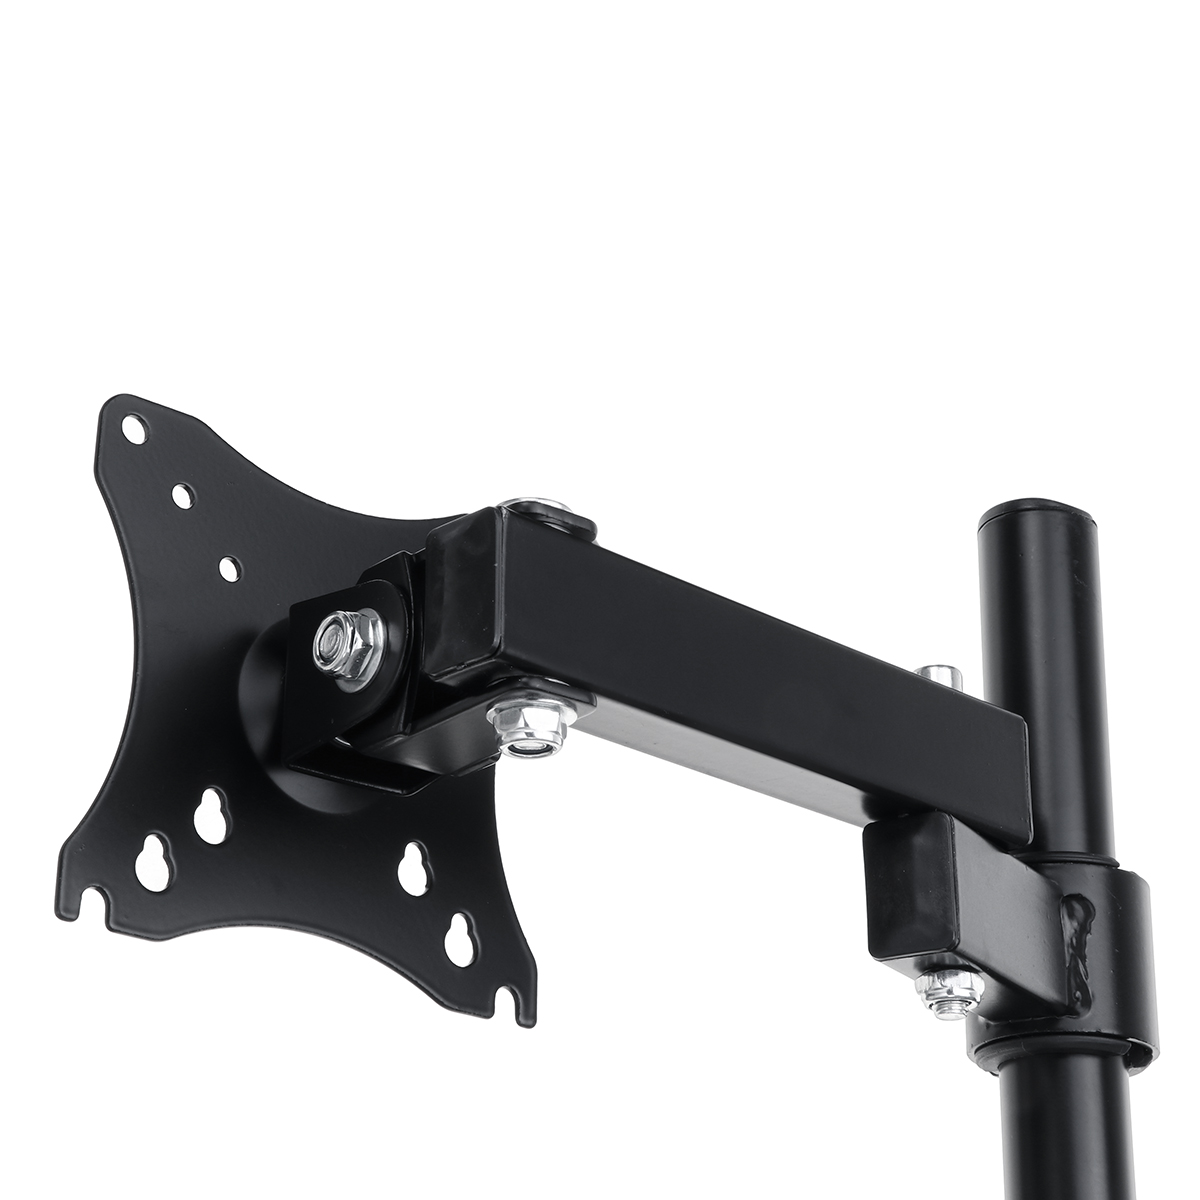 Single-Arm-Desk-Mount-LCD-Computer-Monitor-Bracket-Clamp-Stand-14-27-inch-Screen-TV-Bracket-1900409-10